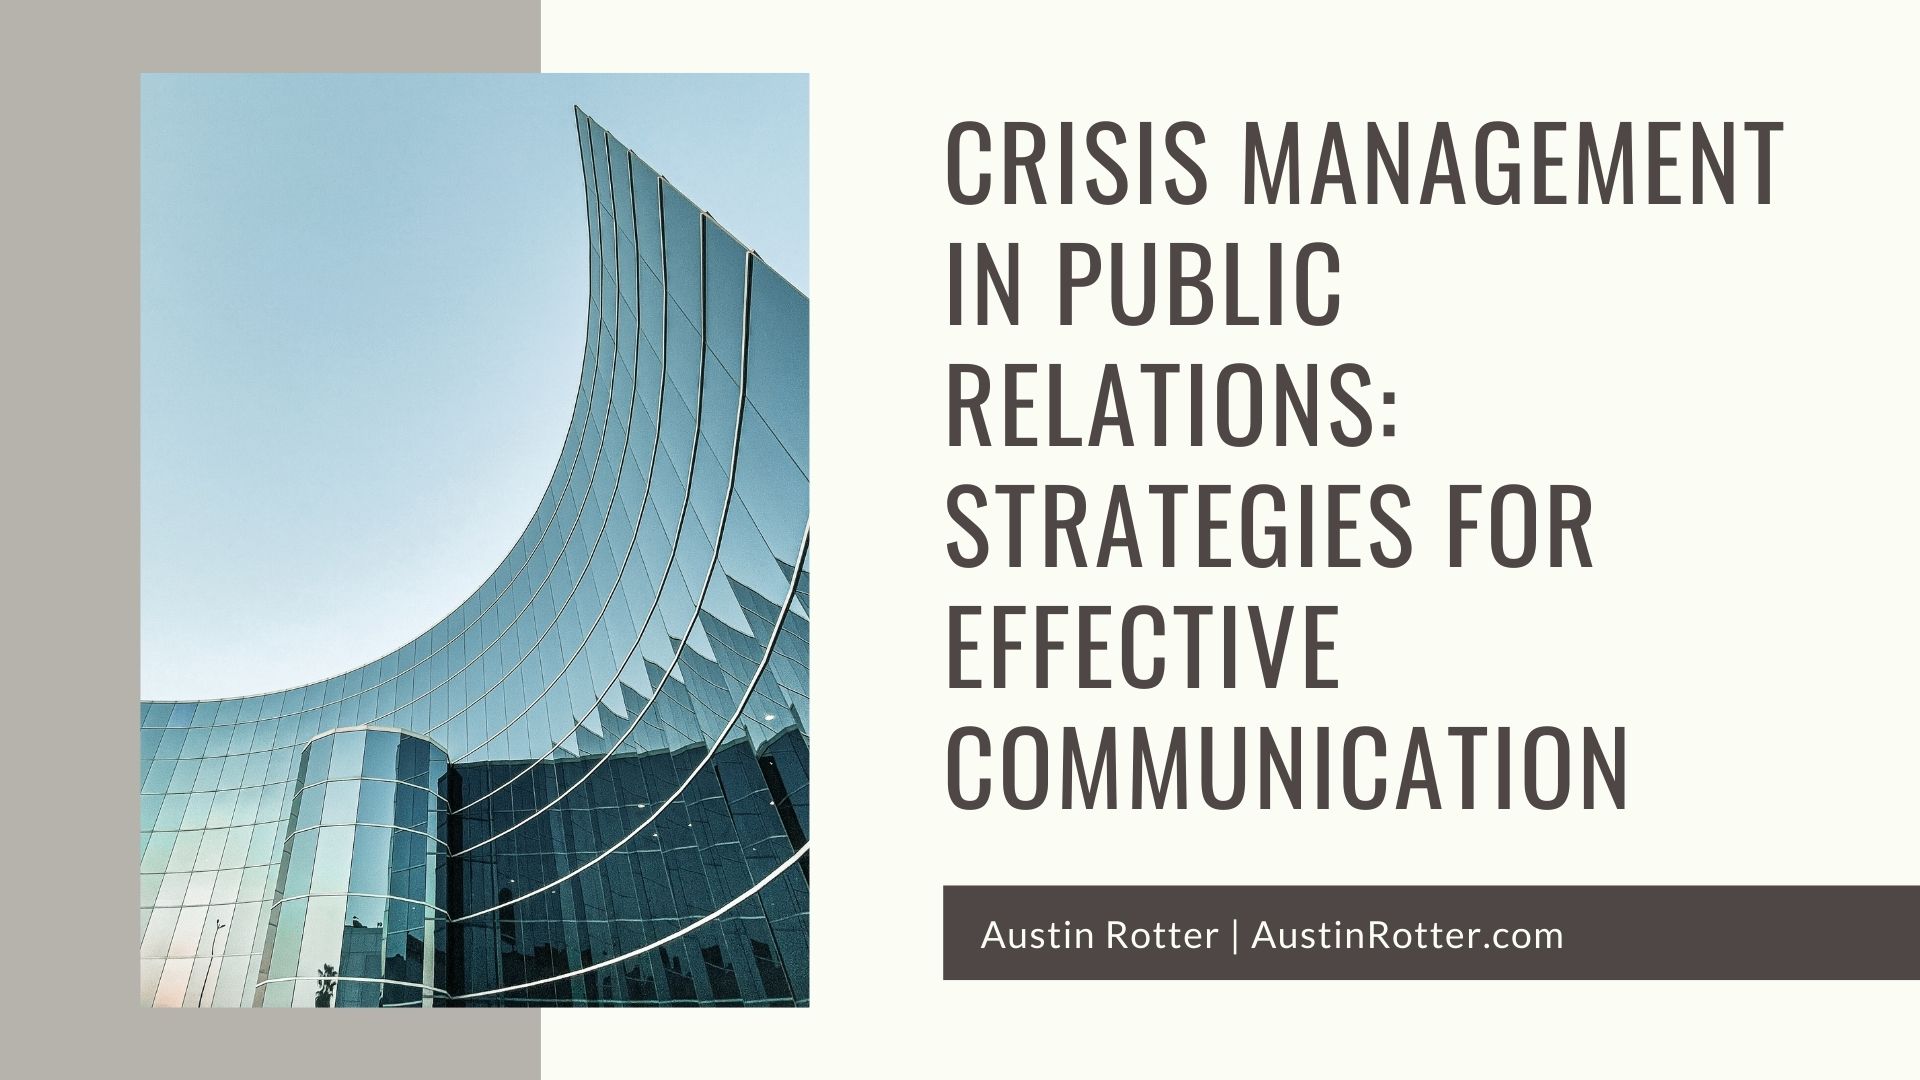 CRISIS MANAGEMENT
IN PUBLIC
RELATIONS:
STRATEGIES FOR
EFFECTIVE
COMMUNICATION